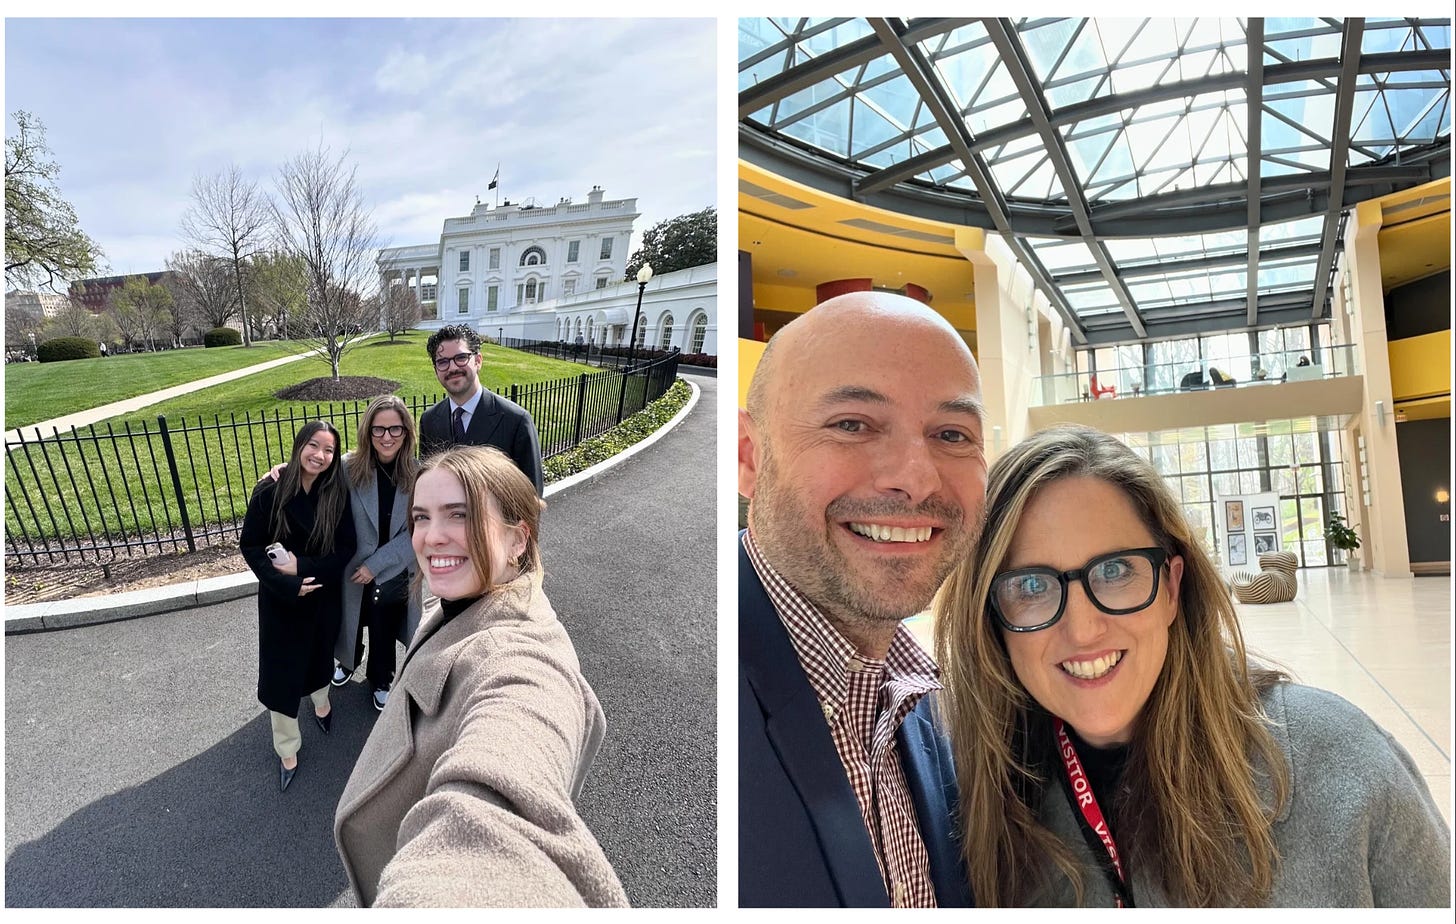 Two photos. On the left is a Point 5 selfie taken by Morgan MacNaughton of a group in front of the White House, including me (Lia Haberman) Marion Dimaano, Morgan MacNaughton and Patrick Steven. On the right is me (Lia Haberman) pictured with diplomatic influencer and Public Affairs Officer at the Italian Embassy, Andreas Sandre (aka TikTok’s We Are Digital Diplomacy)